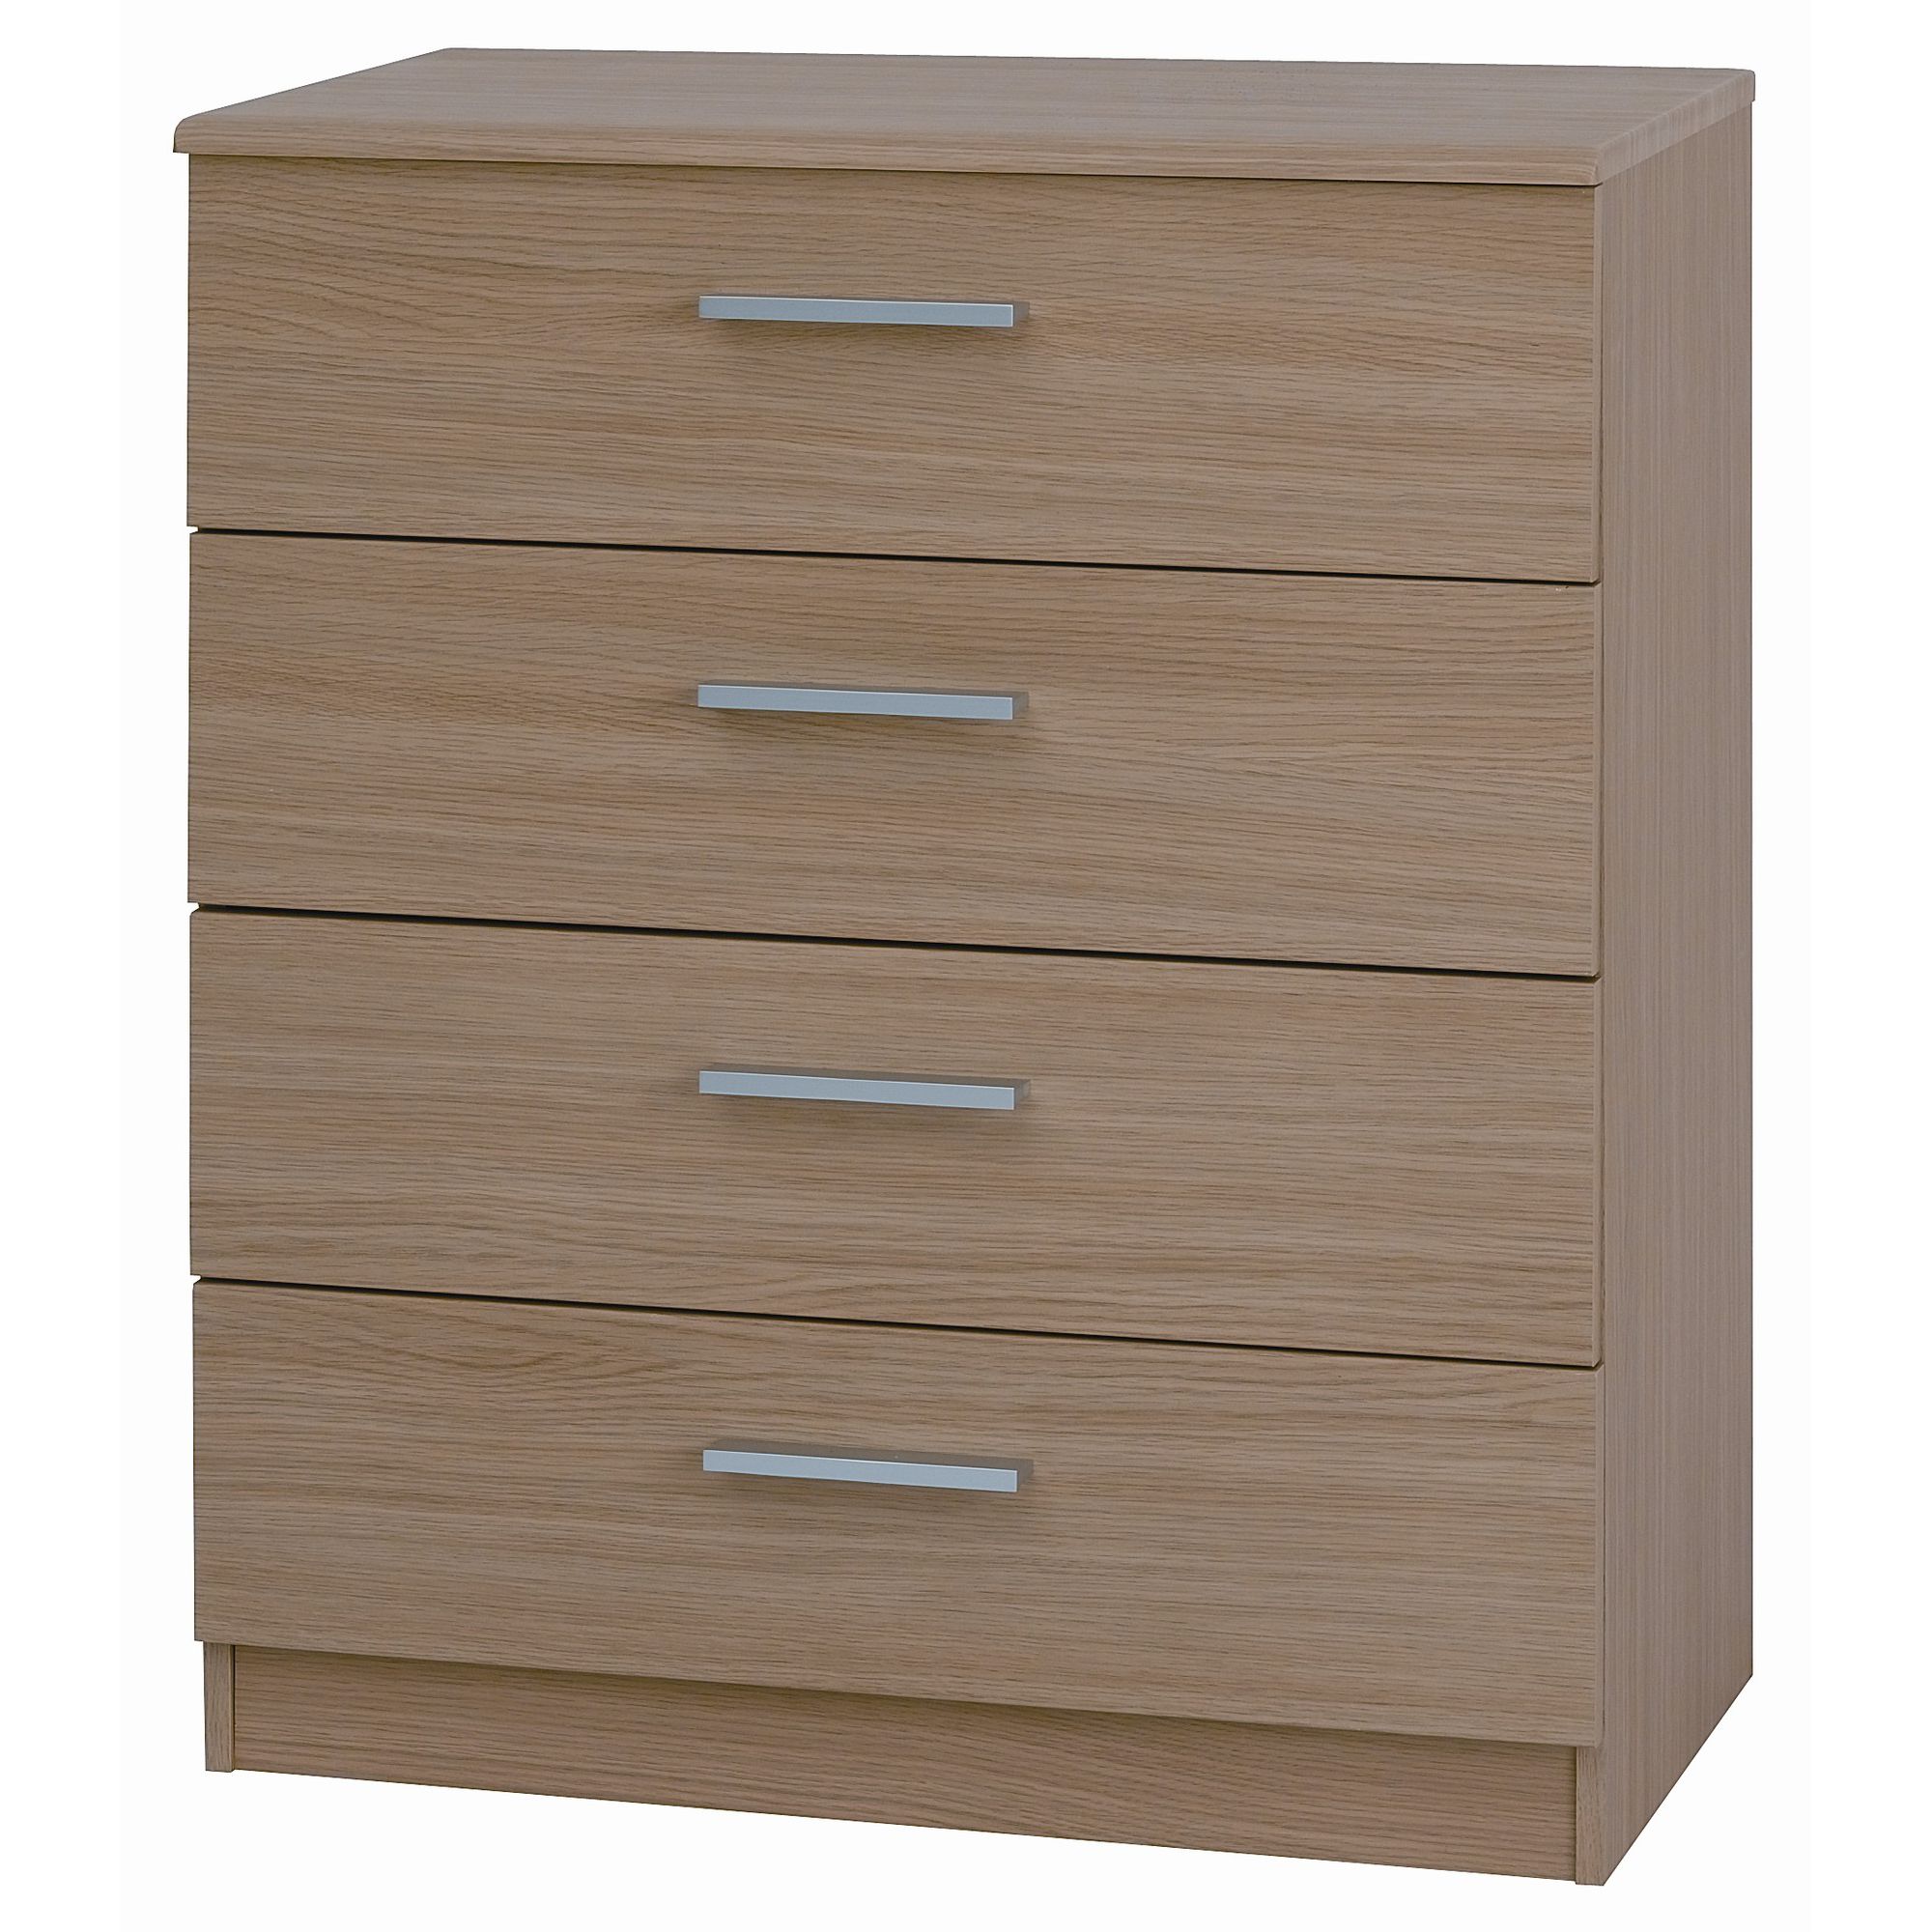 Alto Furniture Visualise Shaker Four Drawer Chest at Tesco Direct